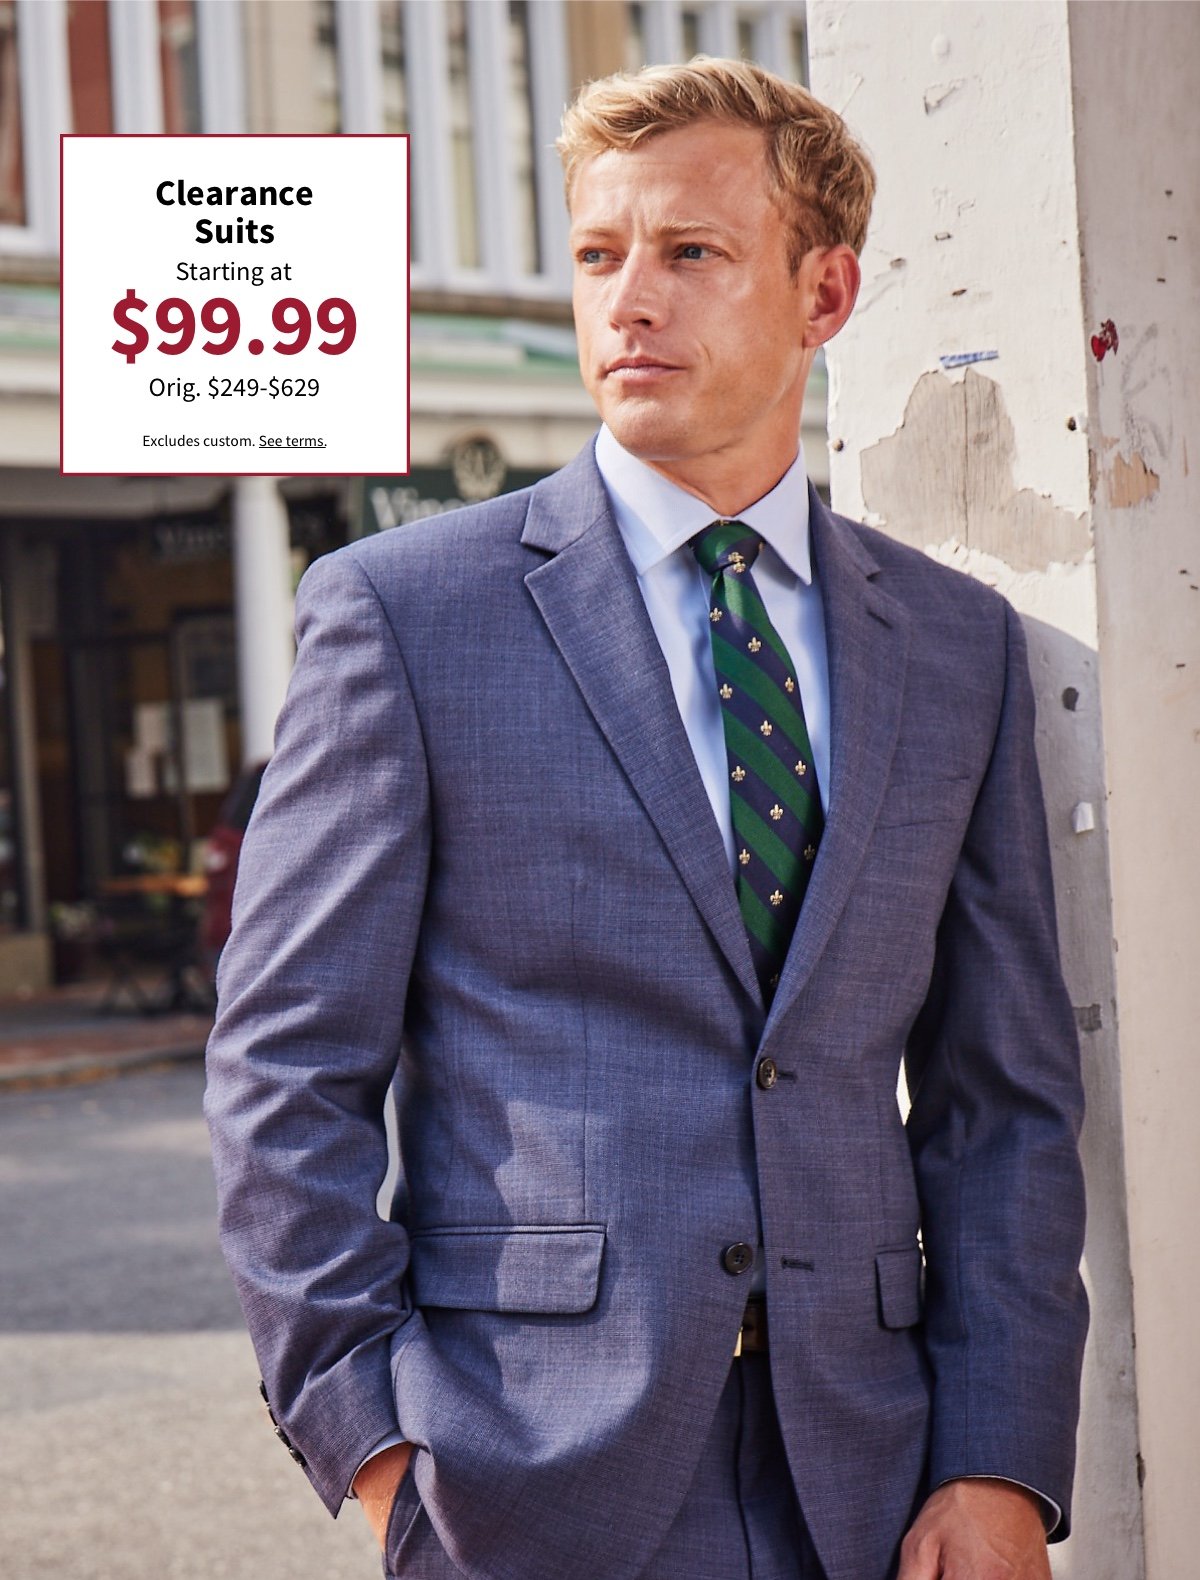 Shop new markdowns on Clearance Suits starting at $99.99